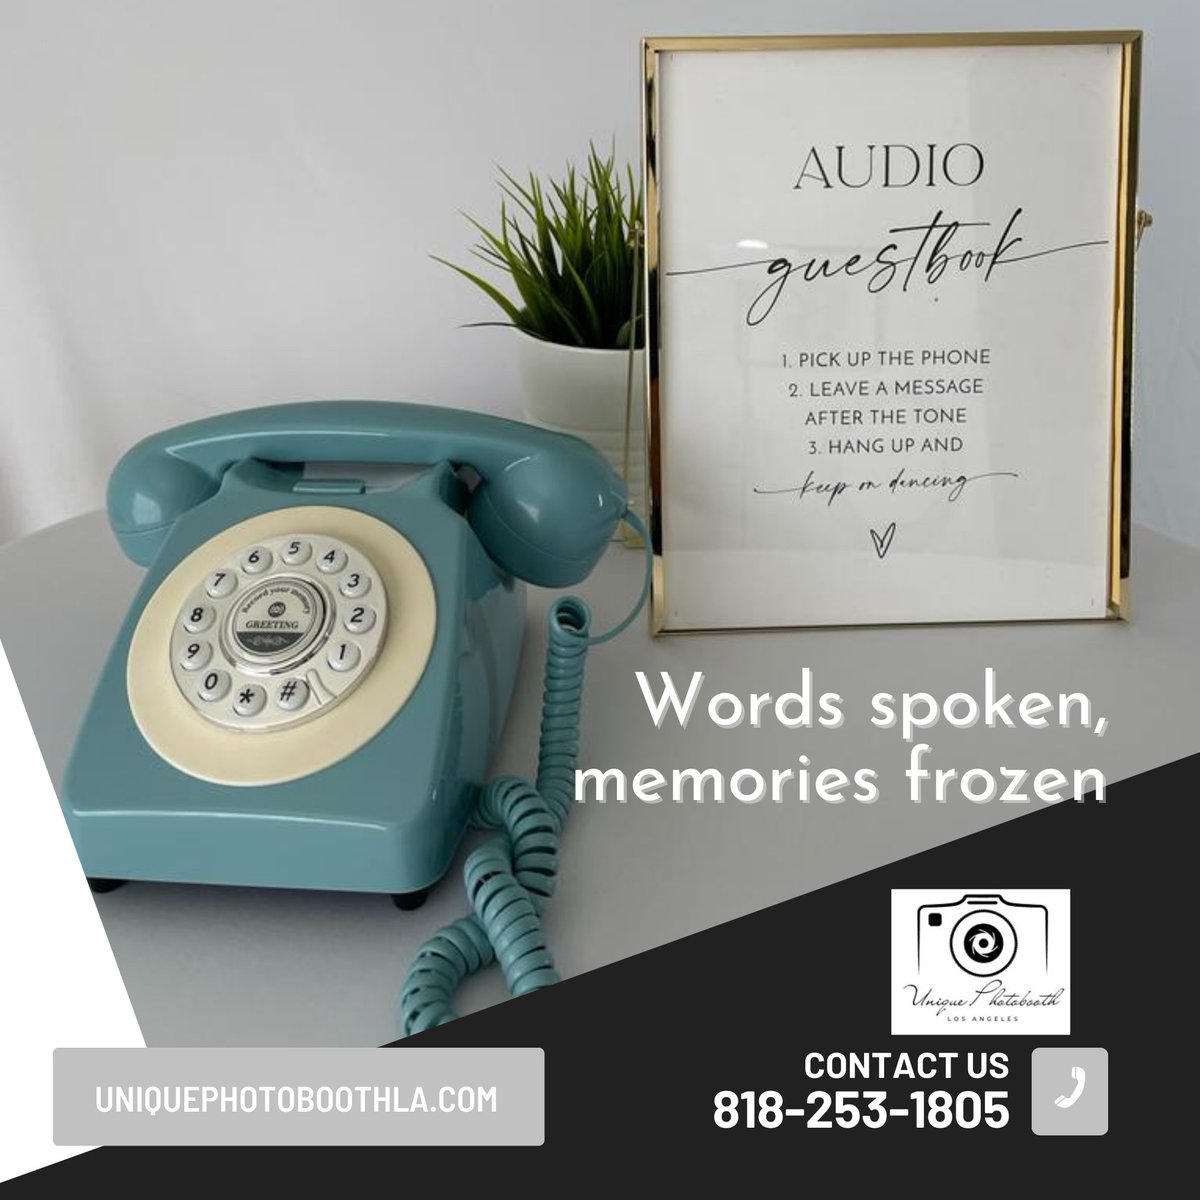 Capture the moment with your voice - add your entry to our audio guestbook.
#360photobooth #photoboothrental #weddingphotobooth #quinceaneraphotobooth #partyrental #eventphotobooth #photoboothforrent #photobooth #Losangeles #flowers #weddings #SanFernandovalley #audioguestbook